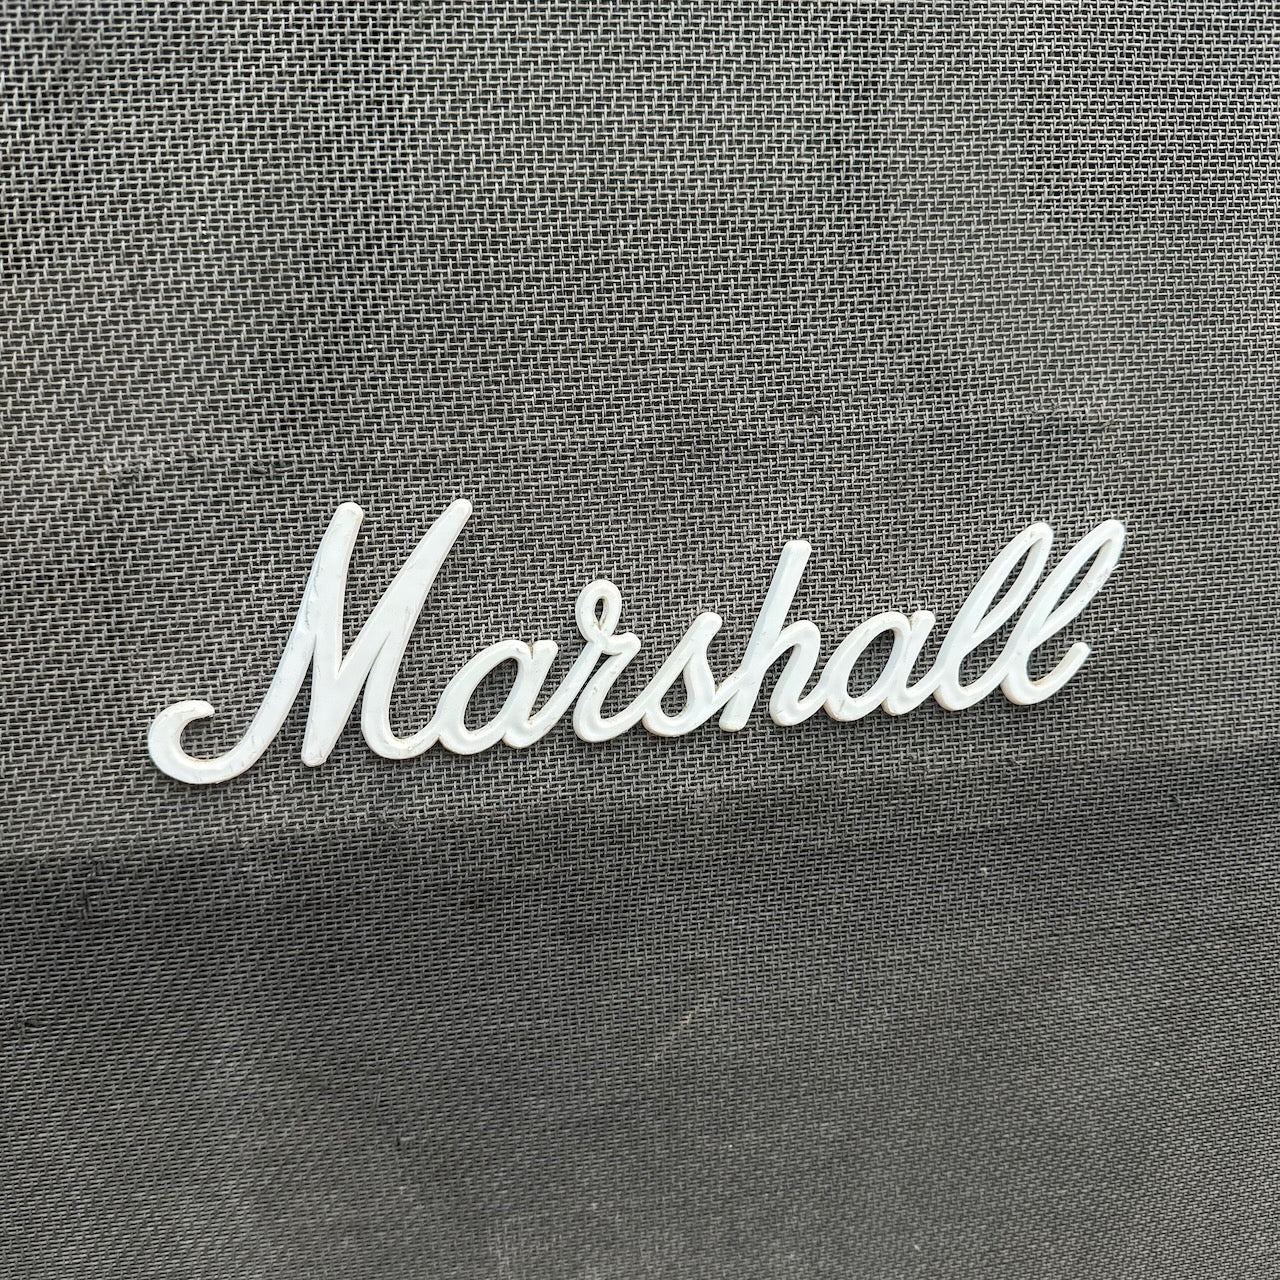 Vintage 1979 Marshall 4x12 Bass Lead Model 1982 Amplifier Cabinet